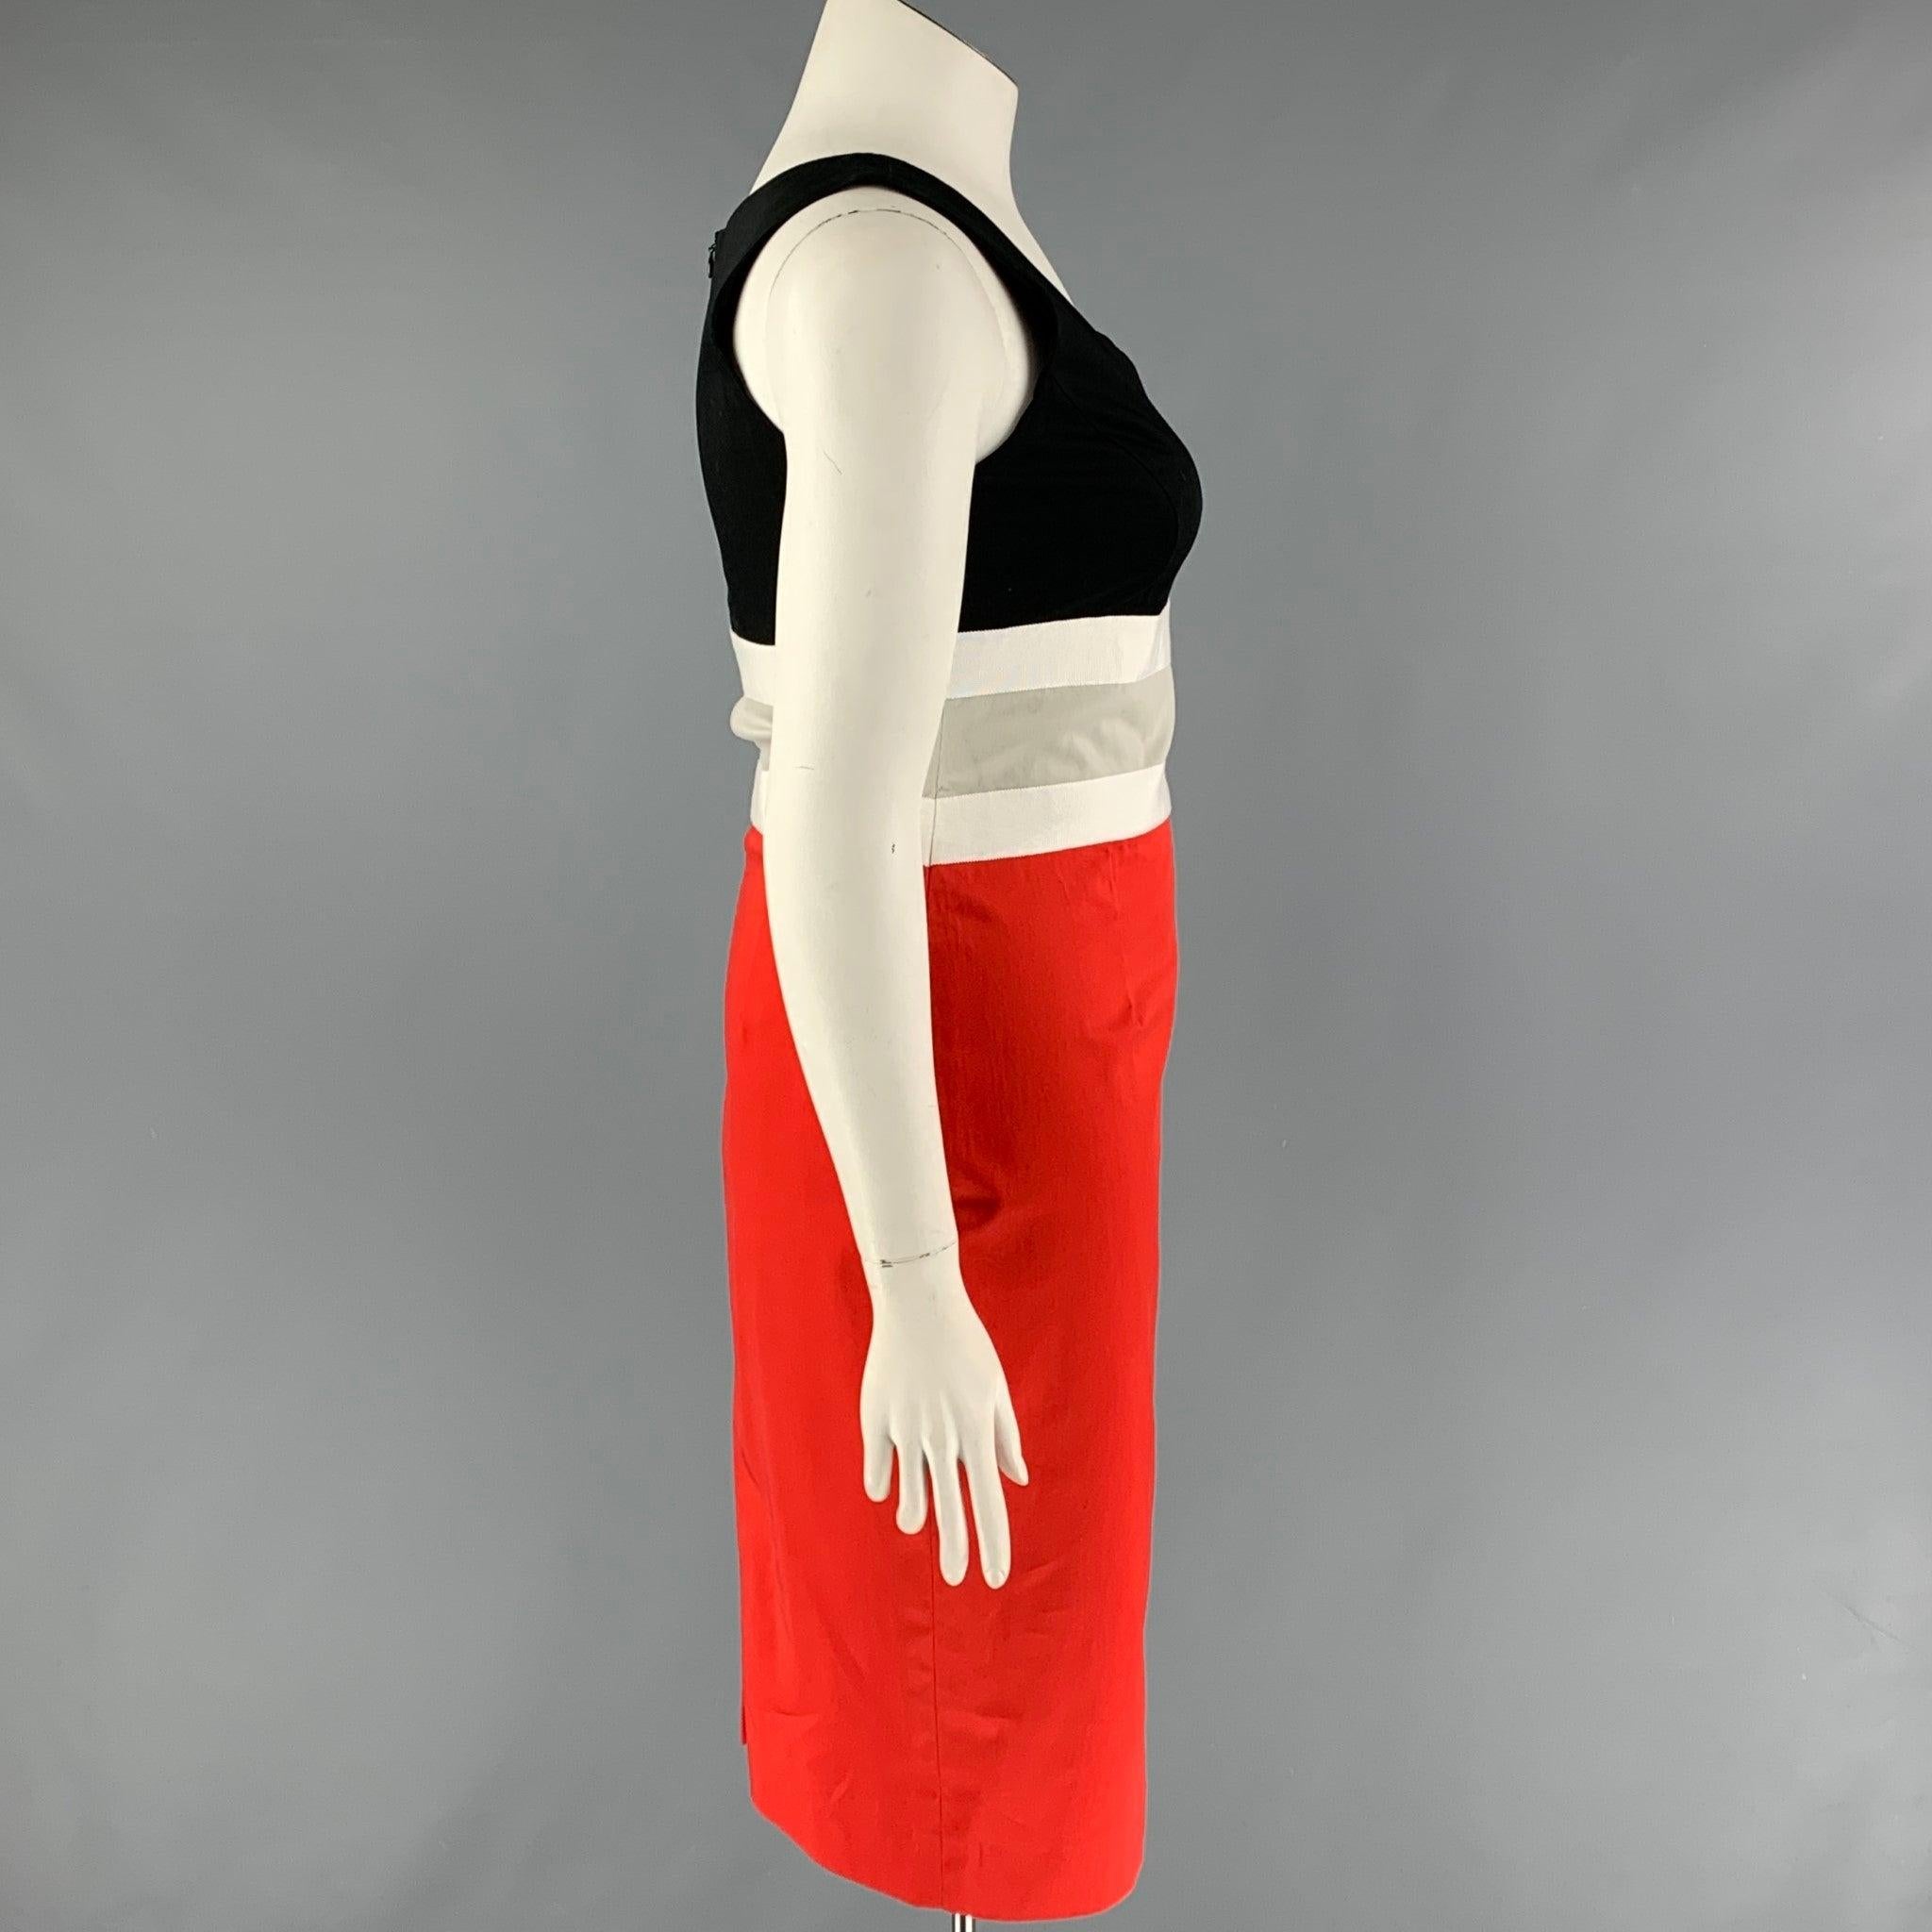 CAROLINA HERRERA dress comes in a red & black color block cotton featuring a sheath style, sleeveless, grosgrain trim, and a back zip up closure.
Very Good
Pre-Owned Condition. 

Marked:   10 

Measurements: 
 
Shoulder: 12.5 inches  Bust: 34 inches